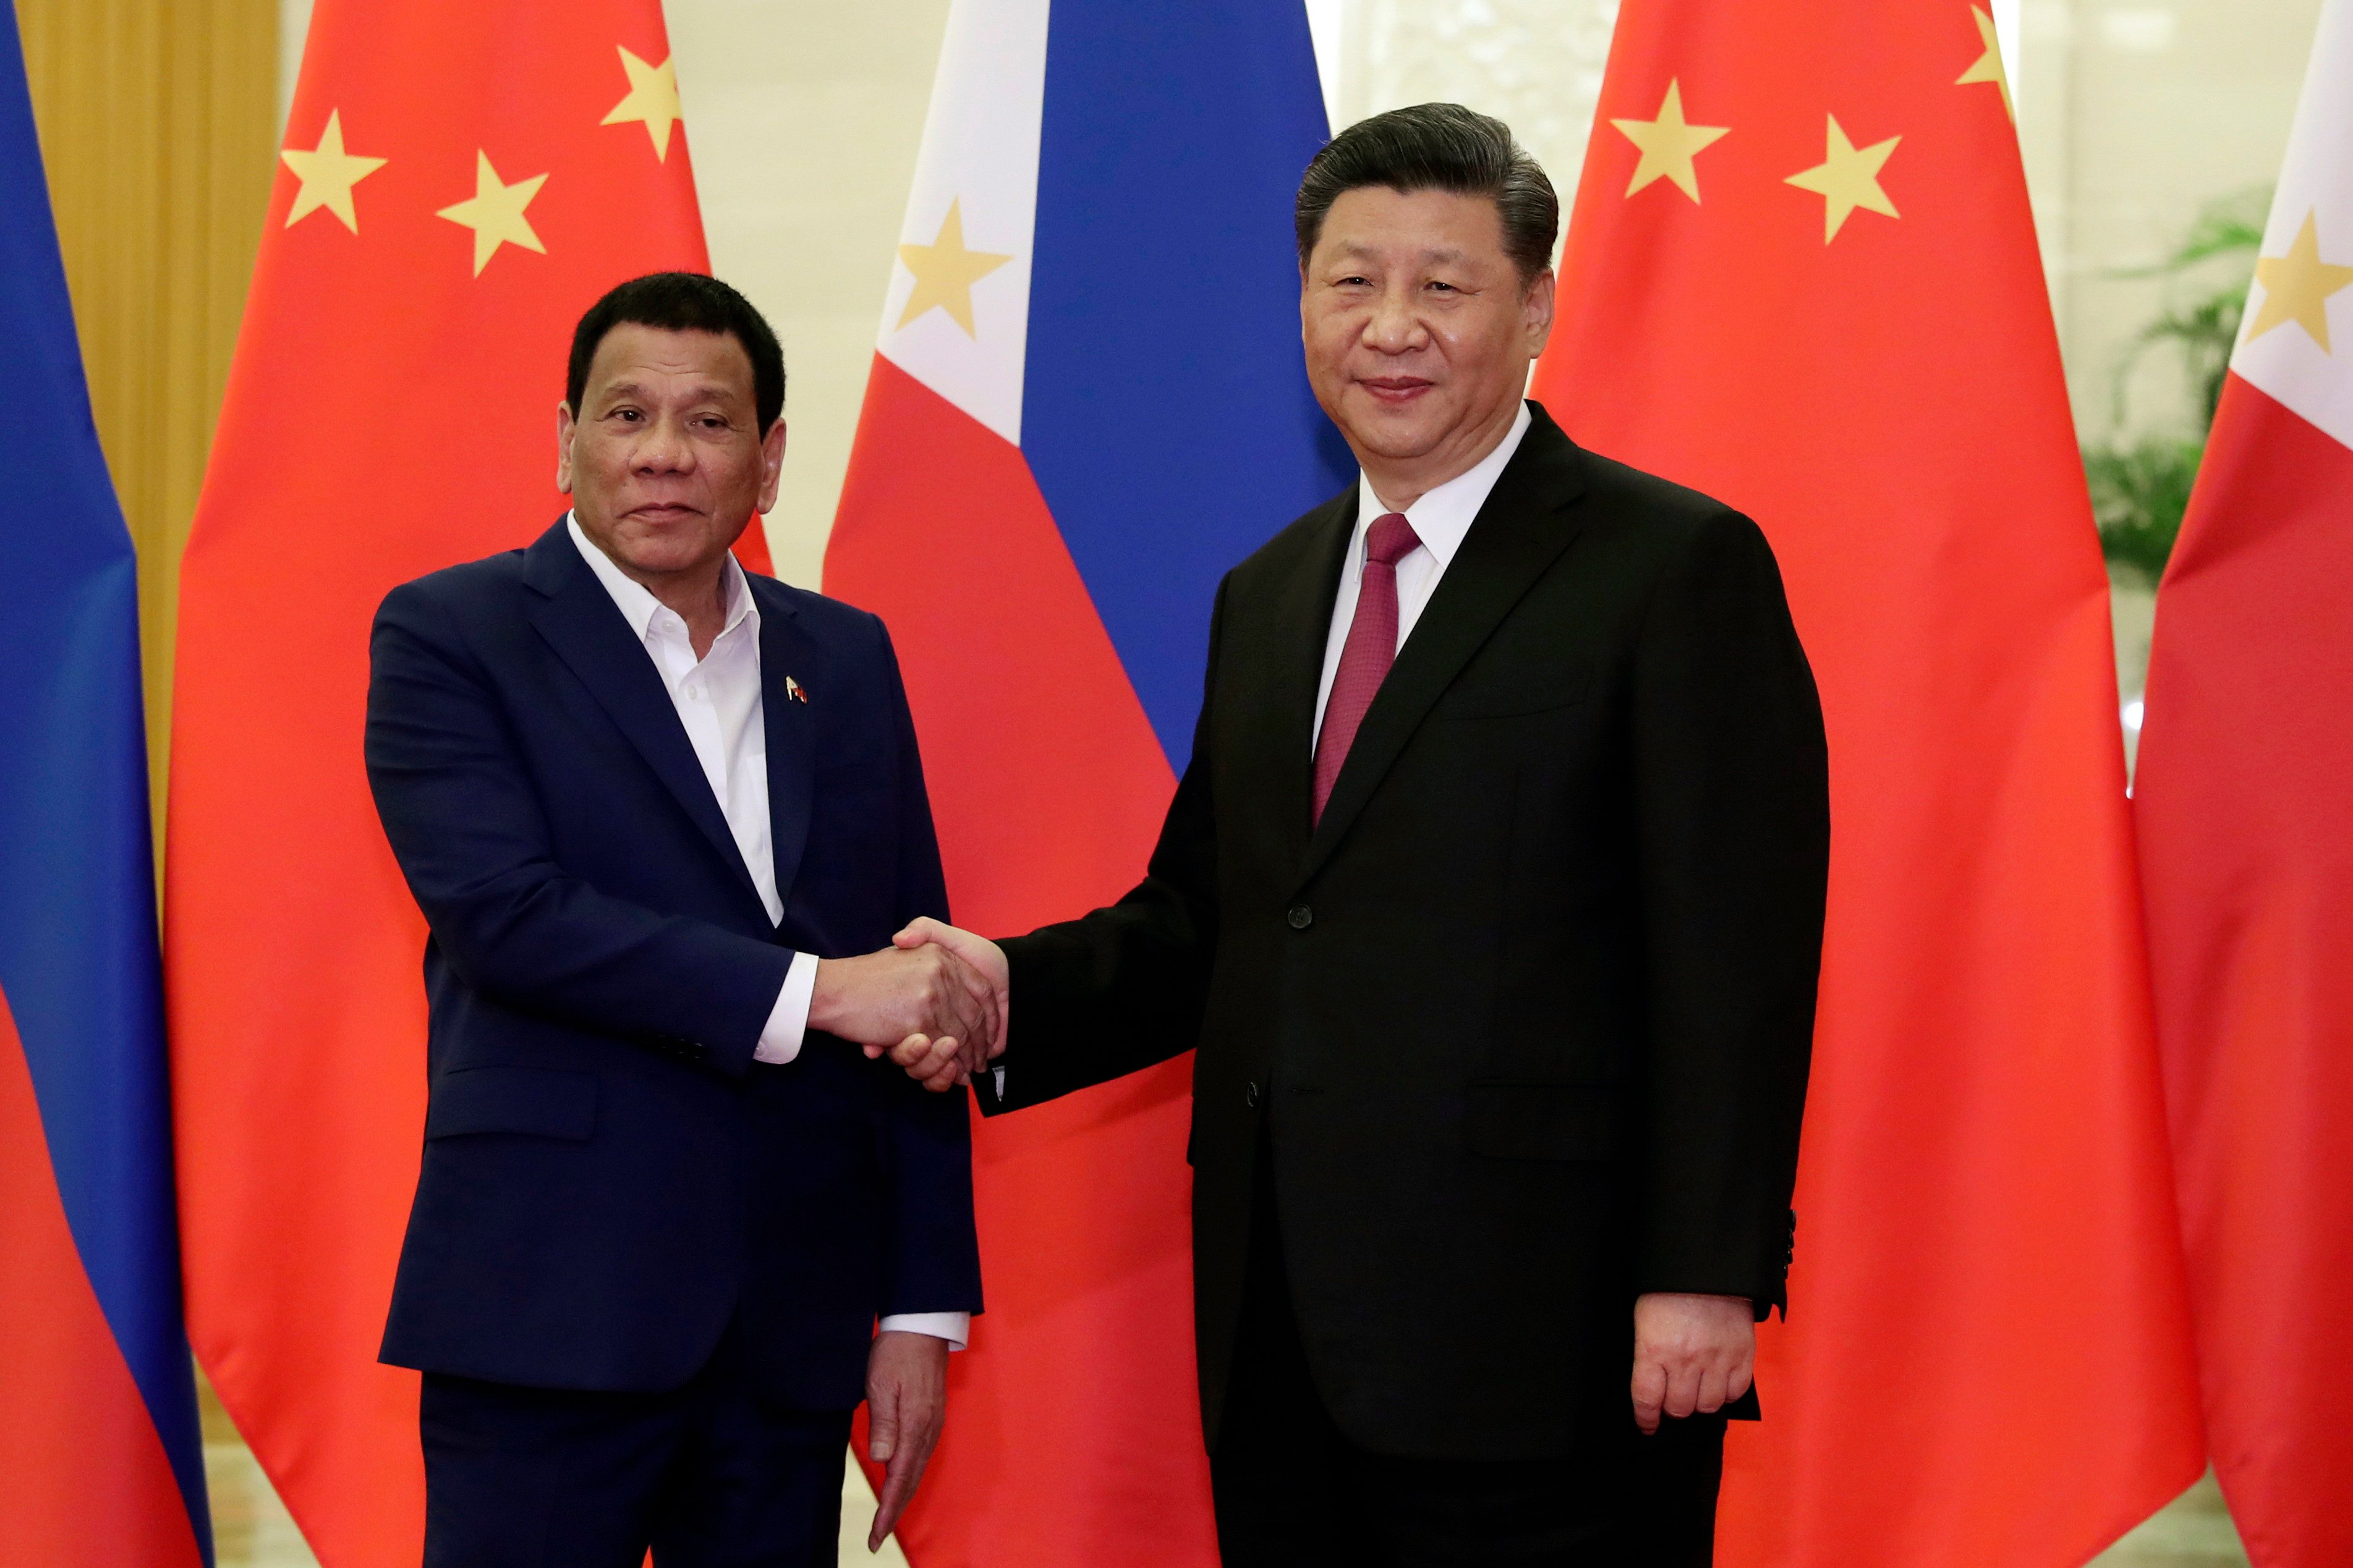 Rodrigo Duterte, then Philippine president, and Chinese President Xi Jinping shake hands before a meeting at the Great Hall of the People in Beijing on April 25, 2019. Photo: AP